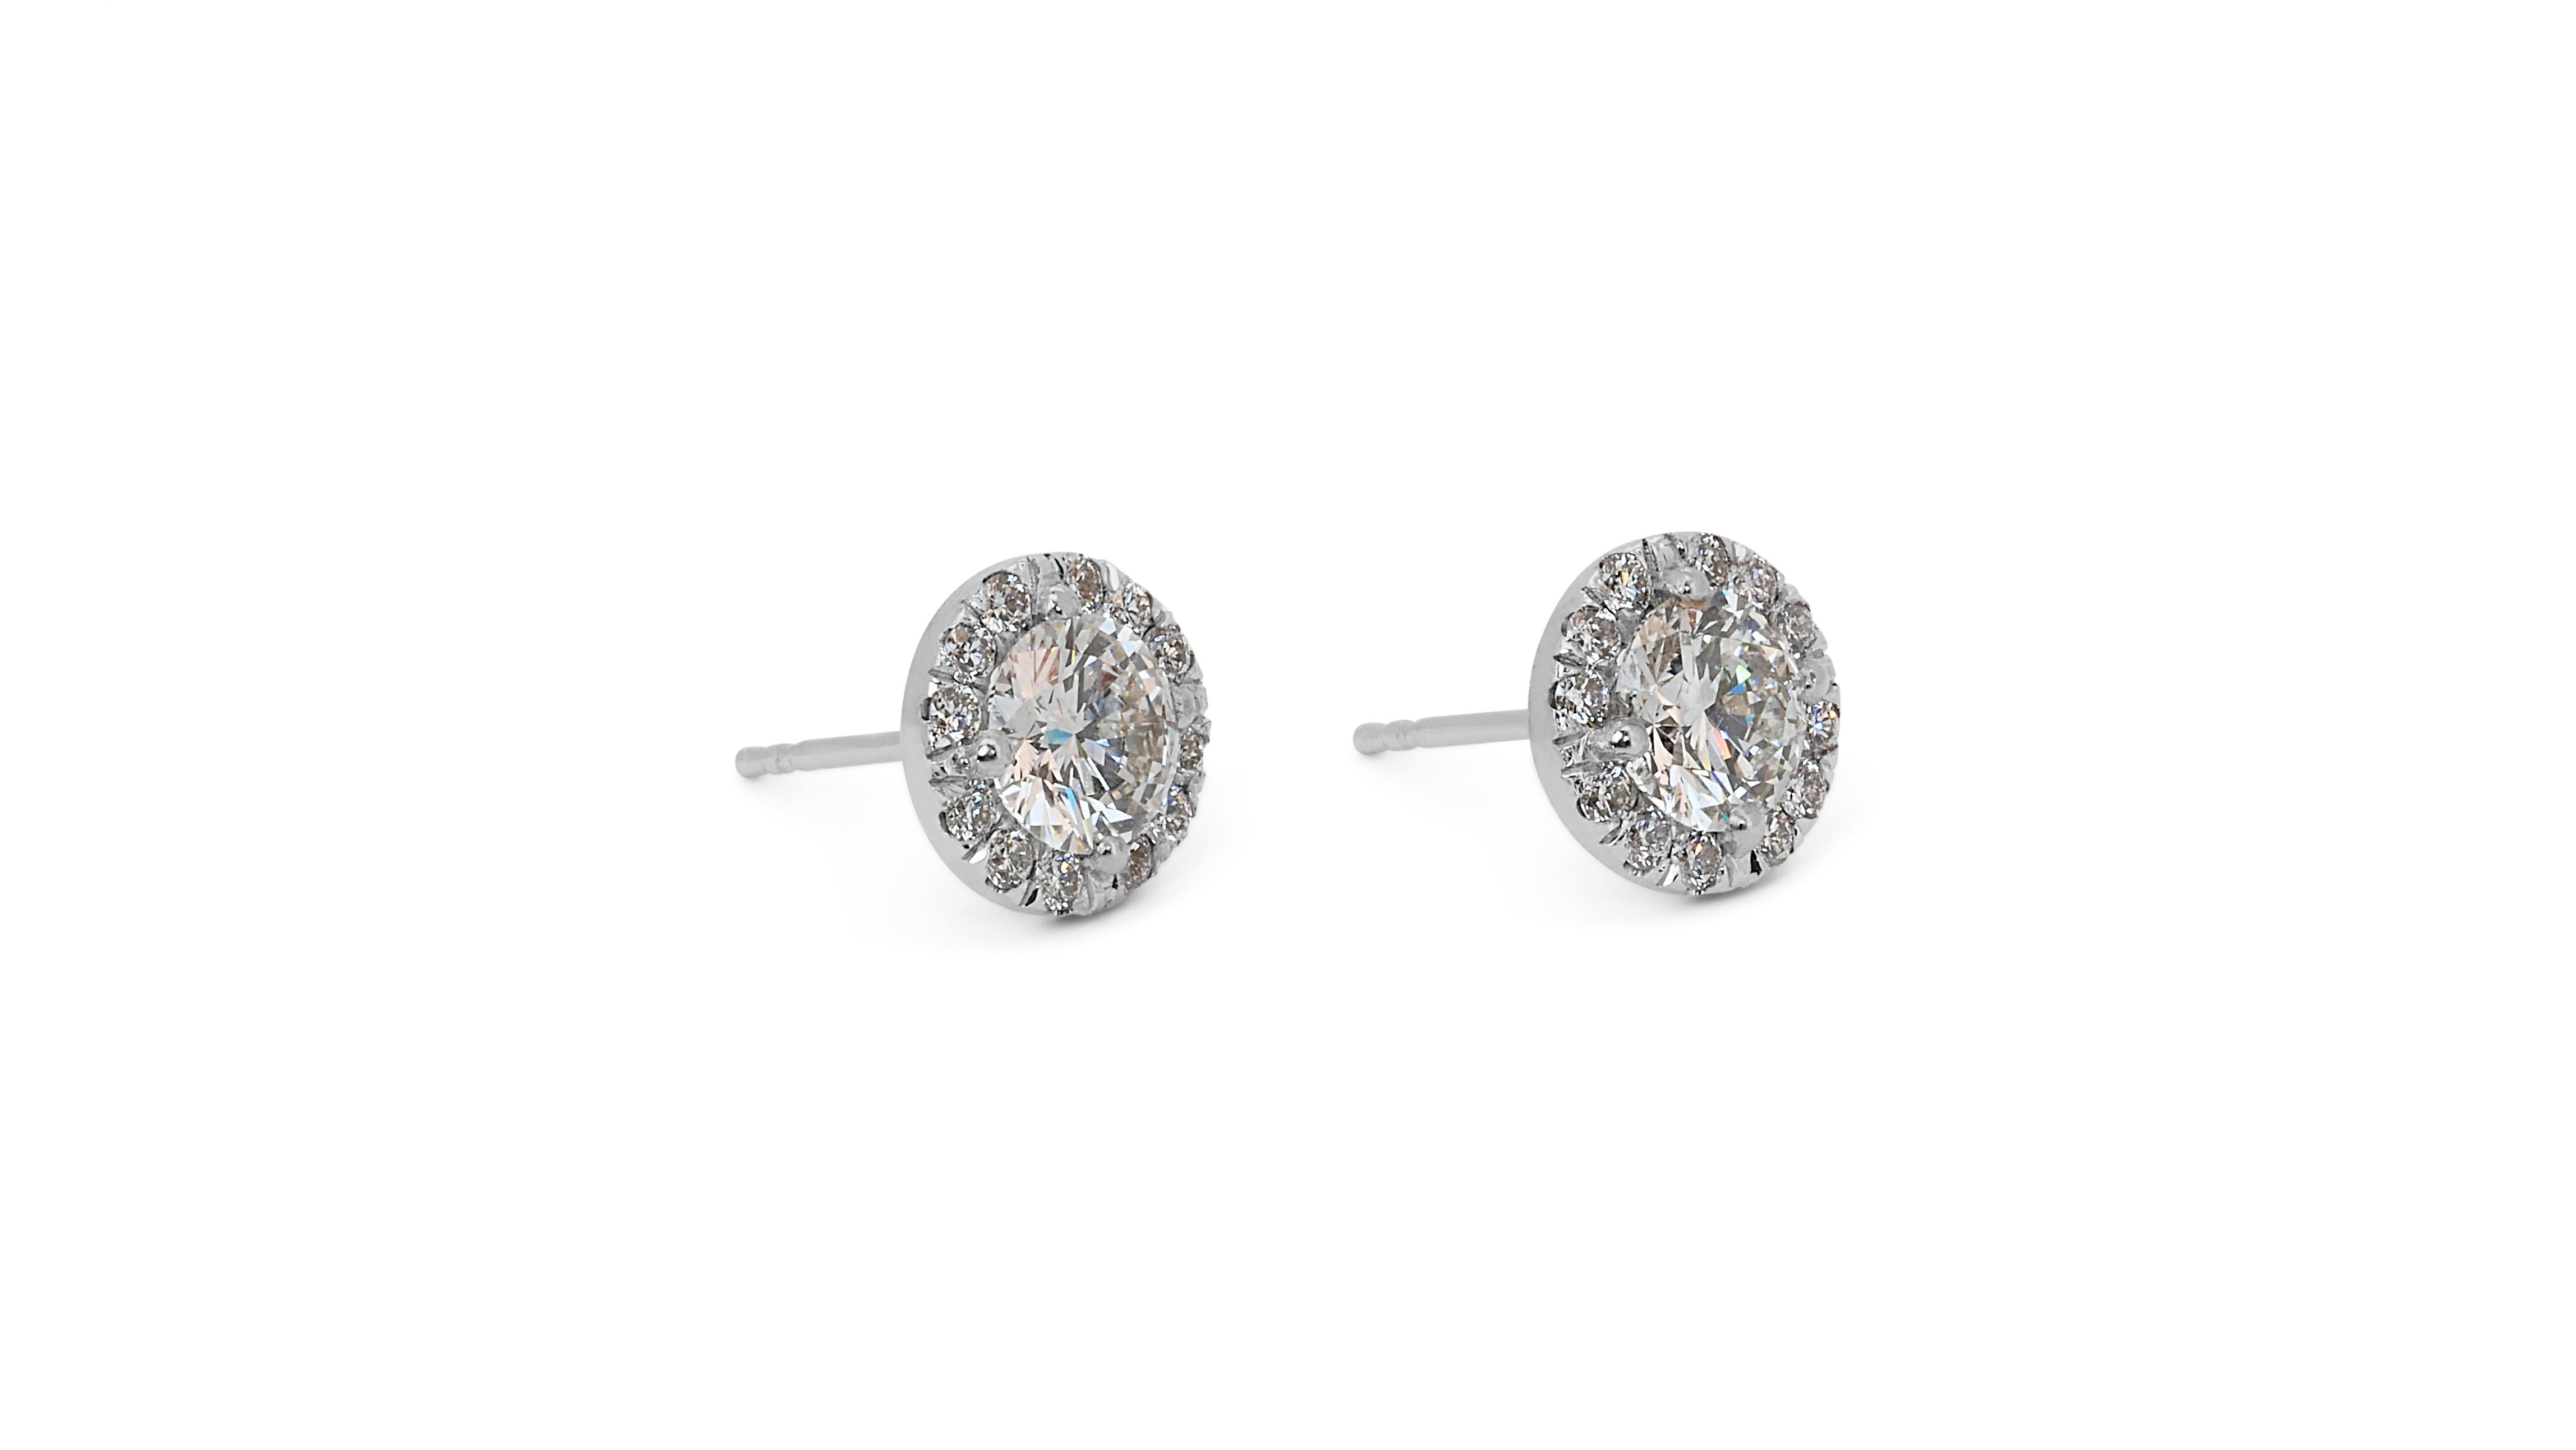 Fascinating 2.55ct Diamond Halo Earrings in 18k White Gold - GIA Certified For Sale 2